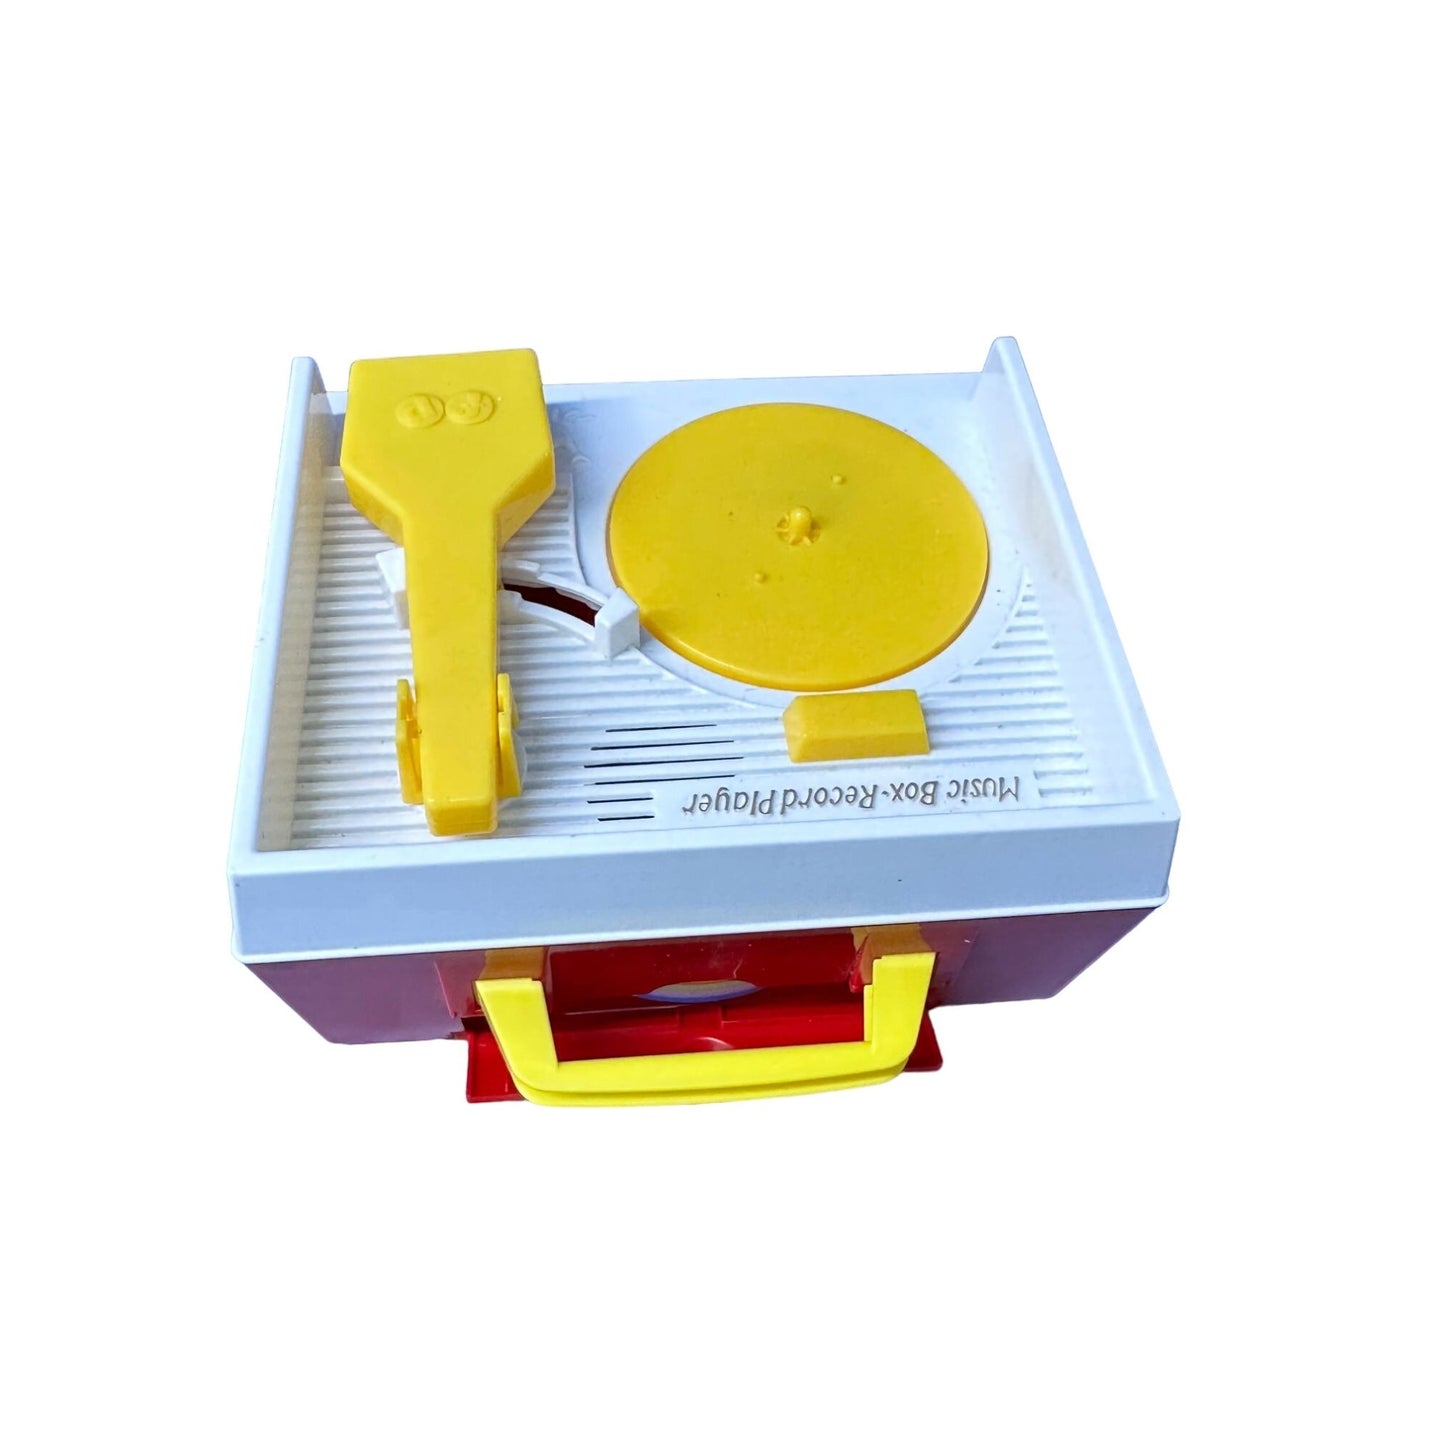 Fisher Price Music Box Record Player Reproduction Classic Toy Red Yellow 2014